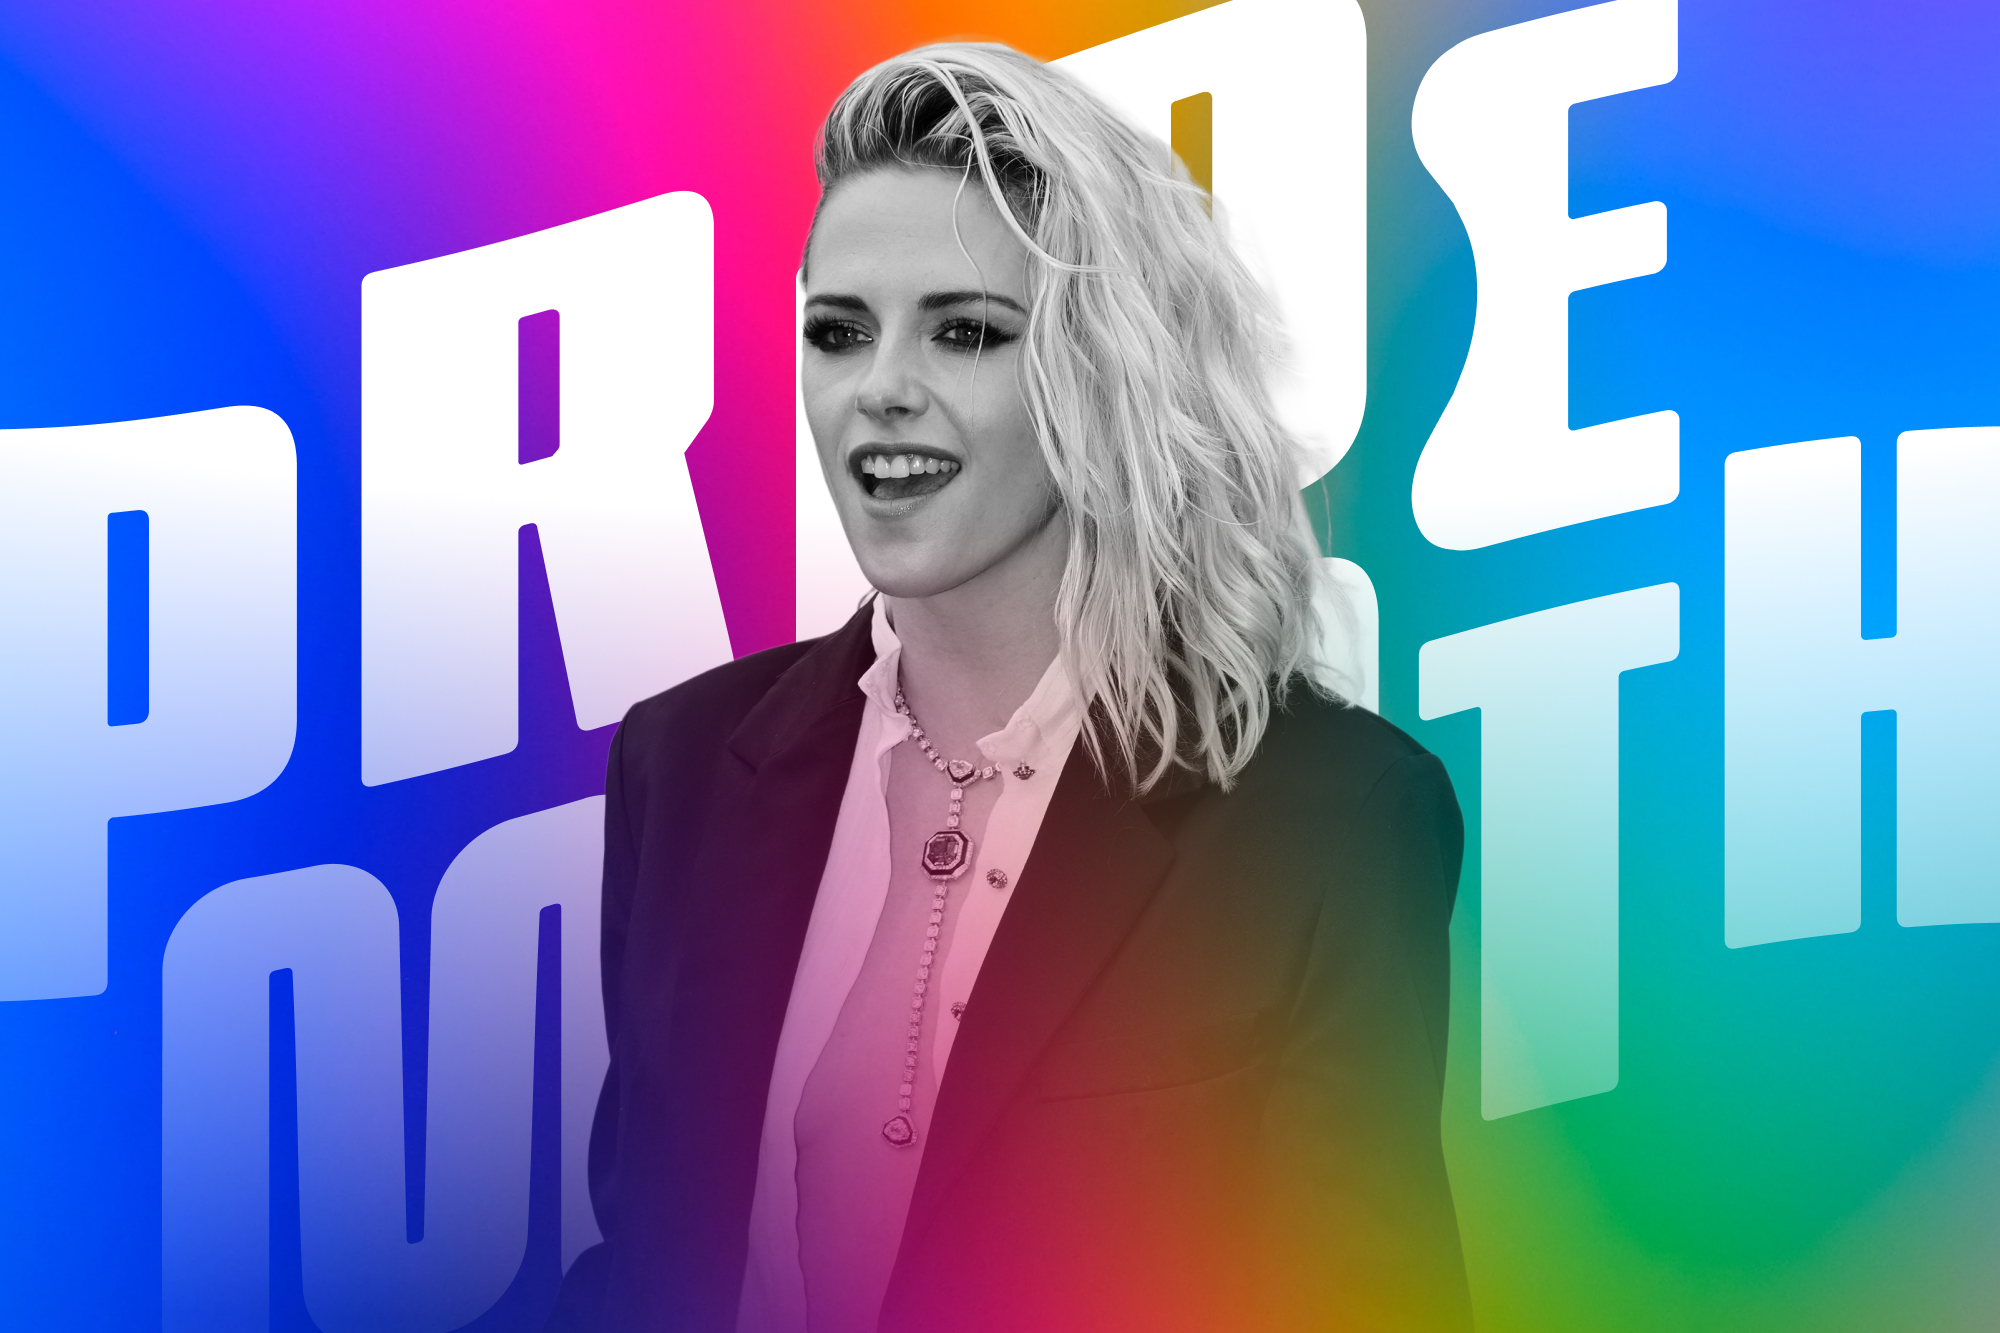 Why Kristen Stewart is a queer icon